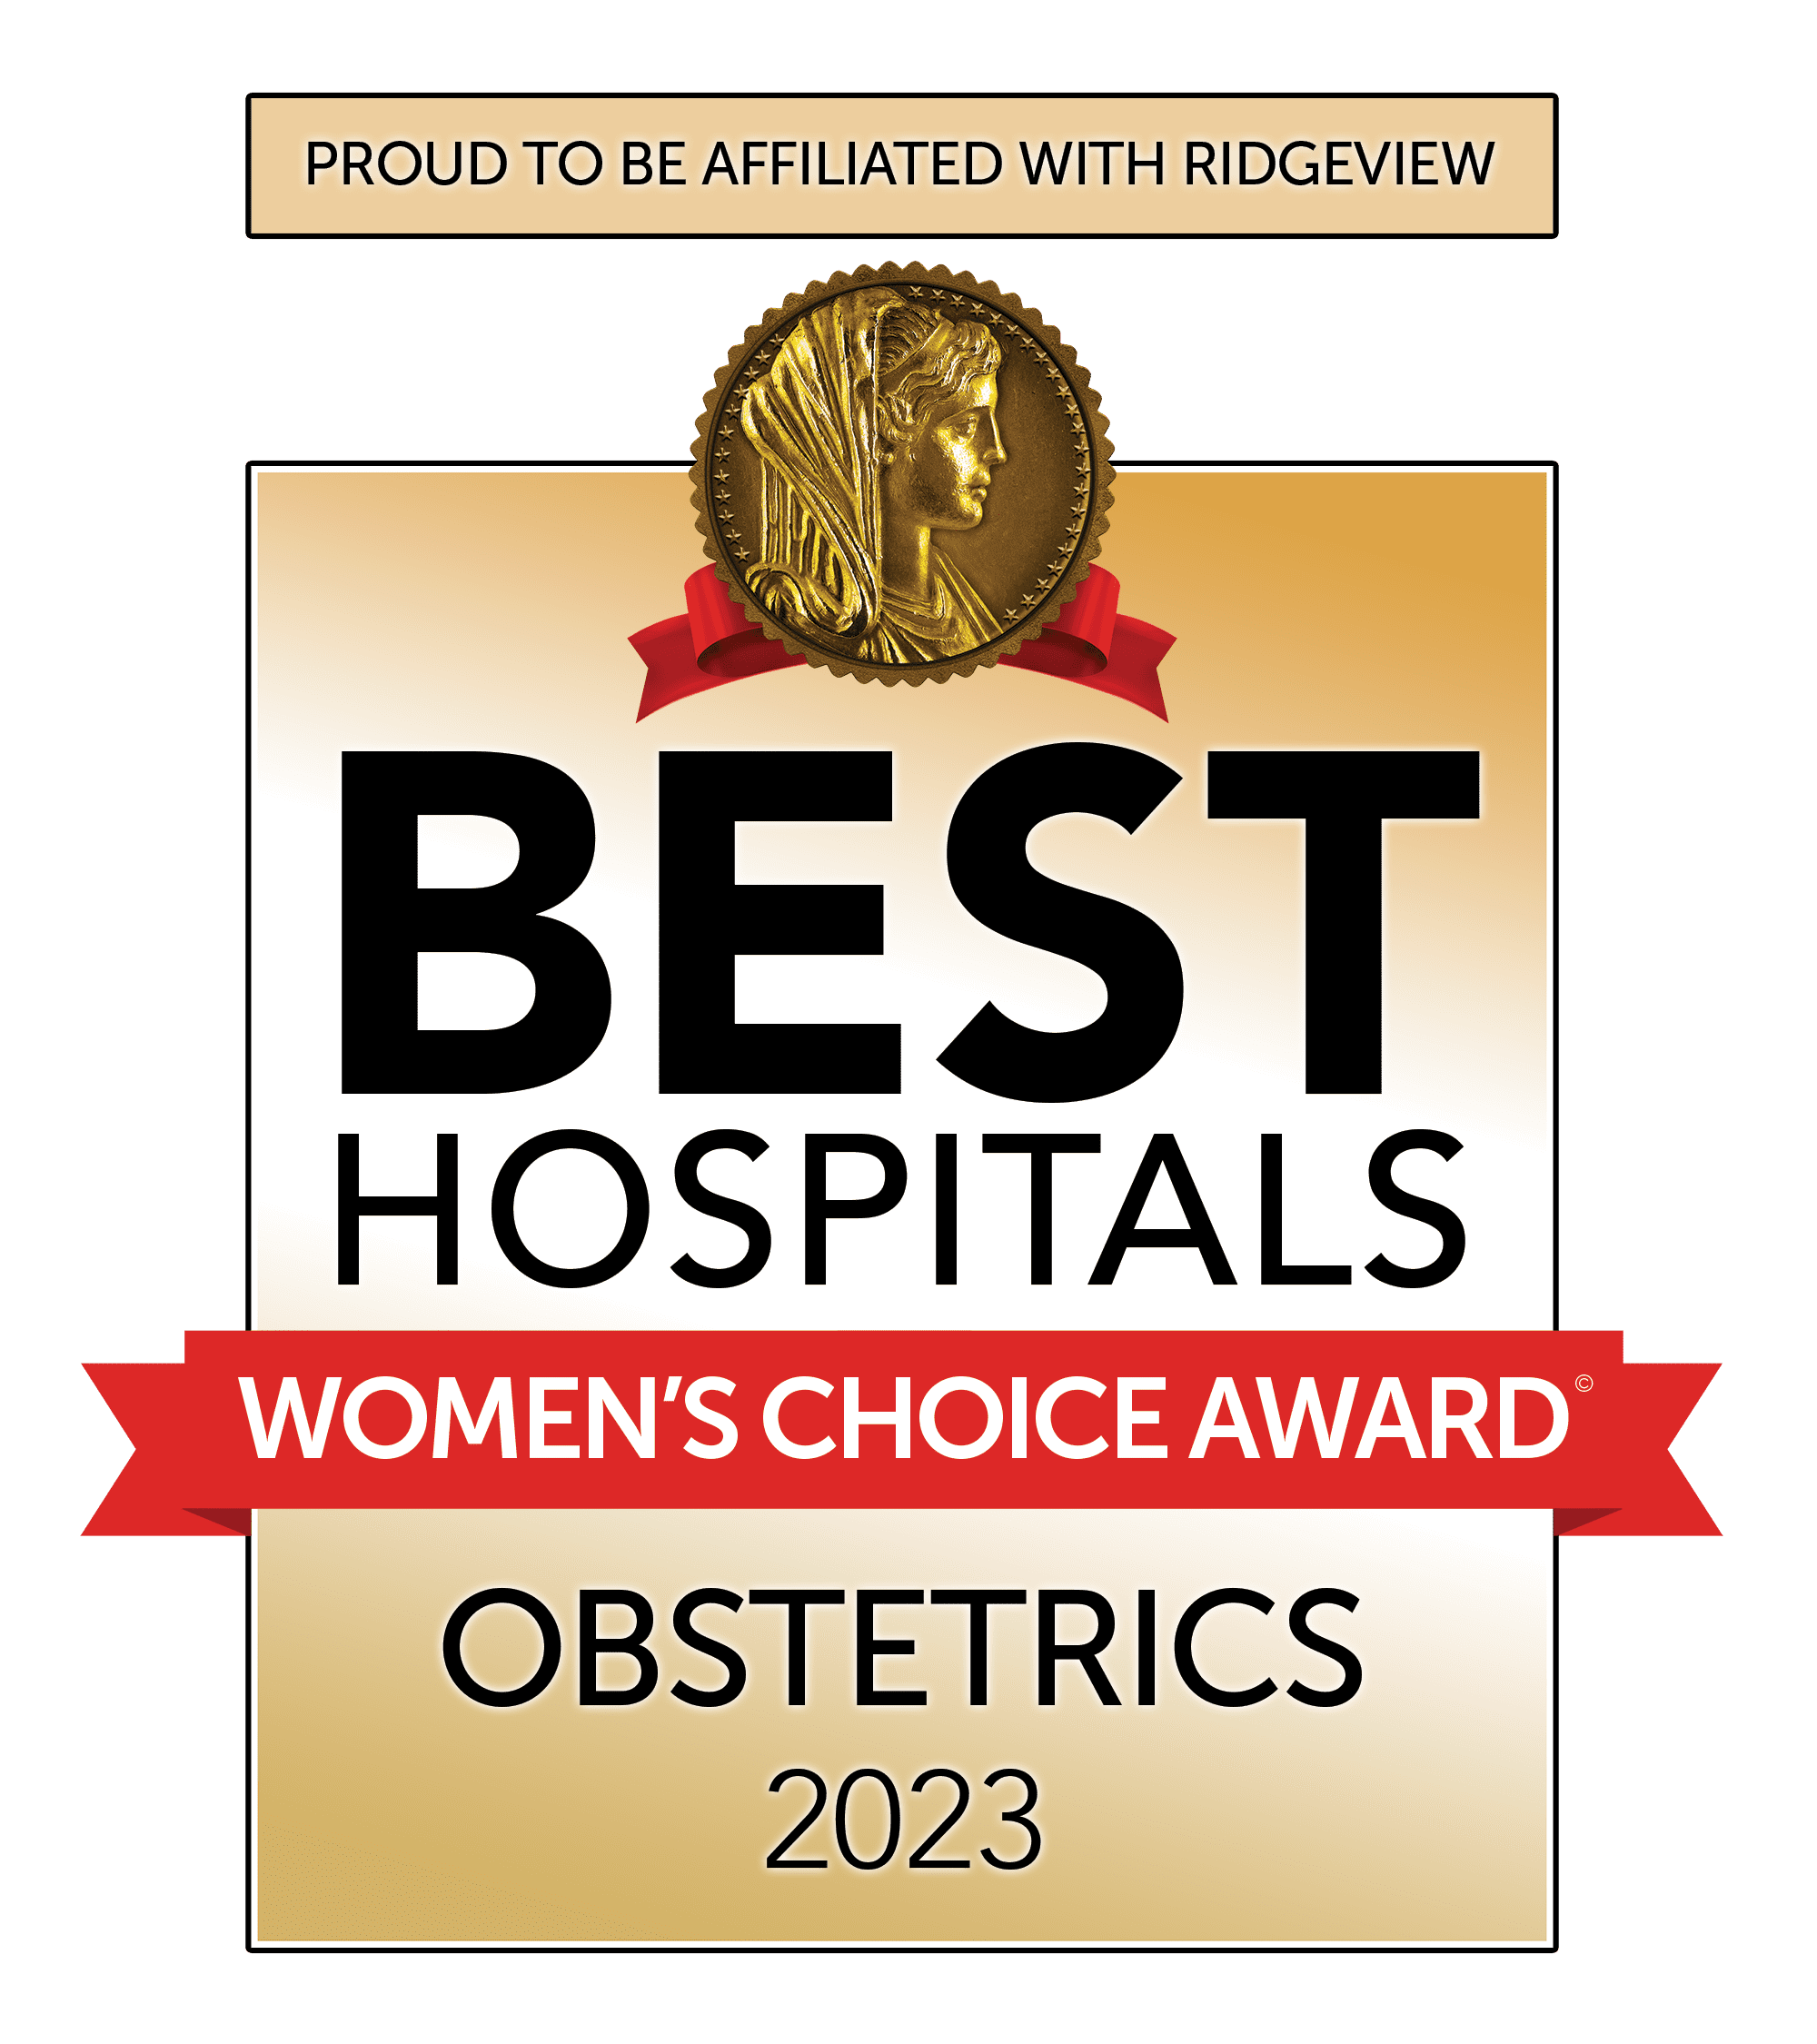 Best Hospitals in Obstetrics affiliation